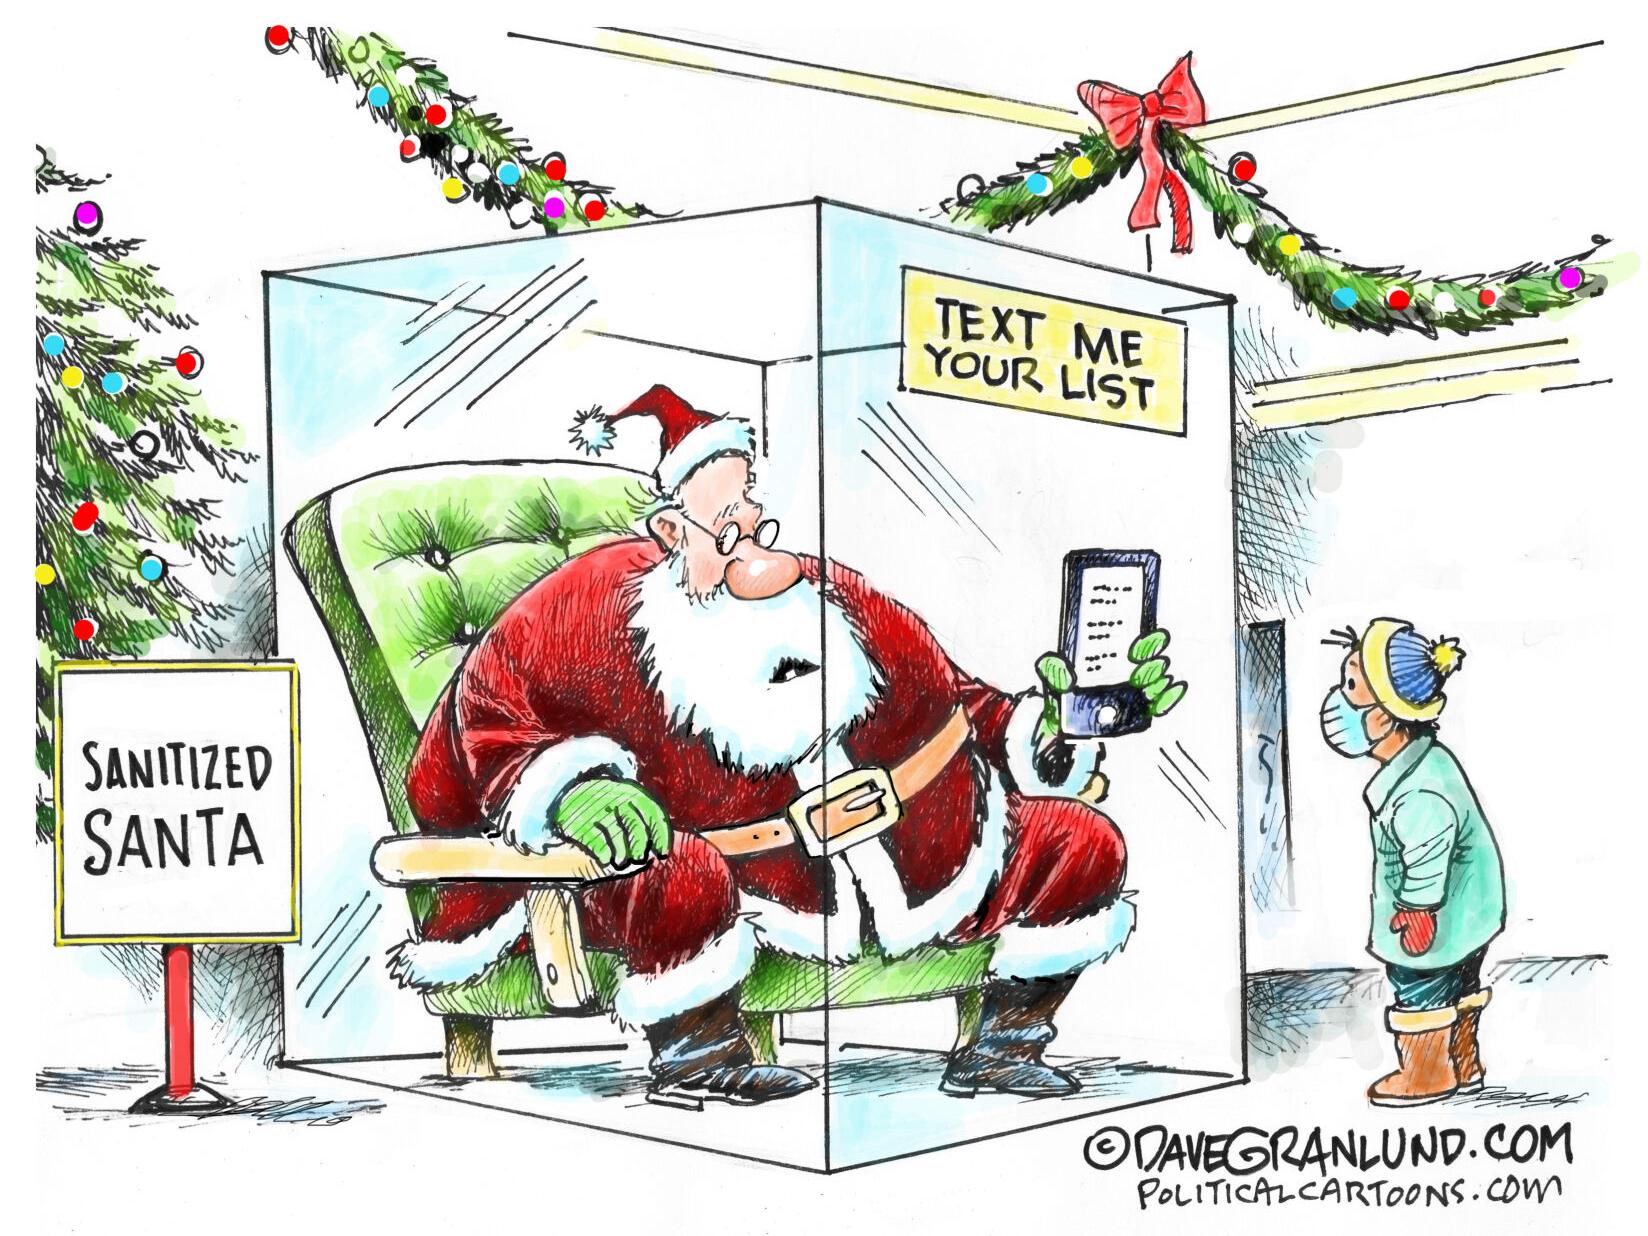 Image source: https://tulsaworld.com/opinion/columnists/syndicated-cartoon-sanitized-santa/article_b21a4188-33df-11eb-8091-179d145bf54a.html